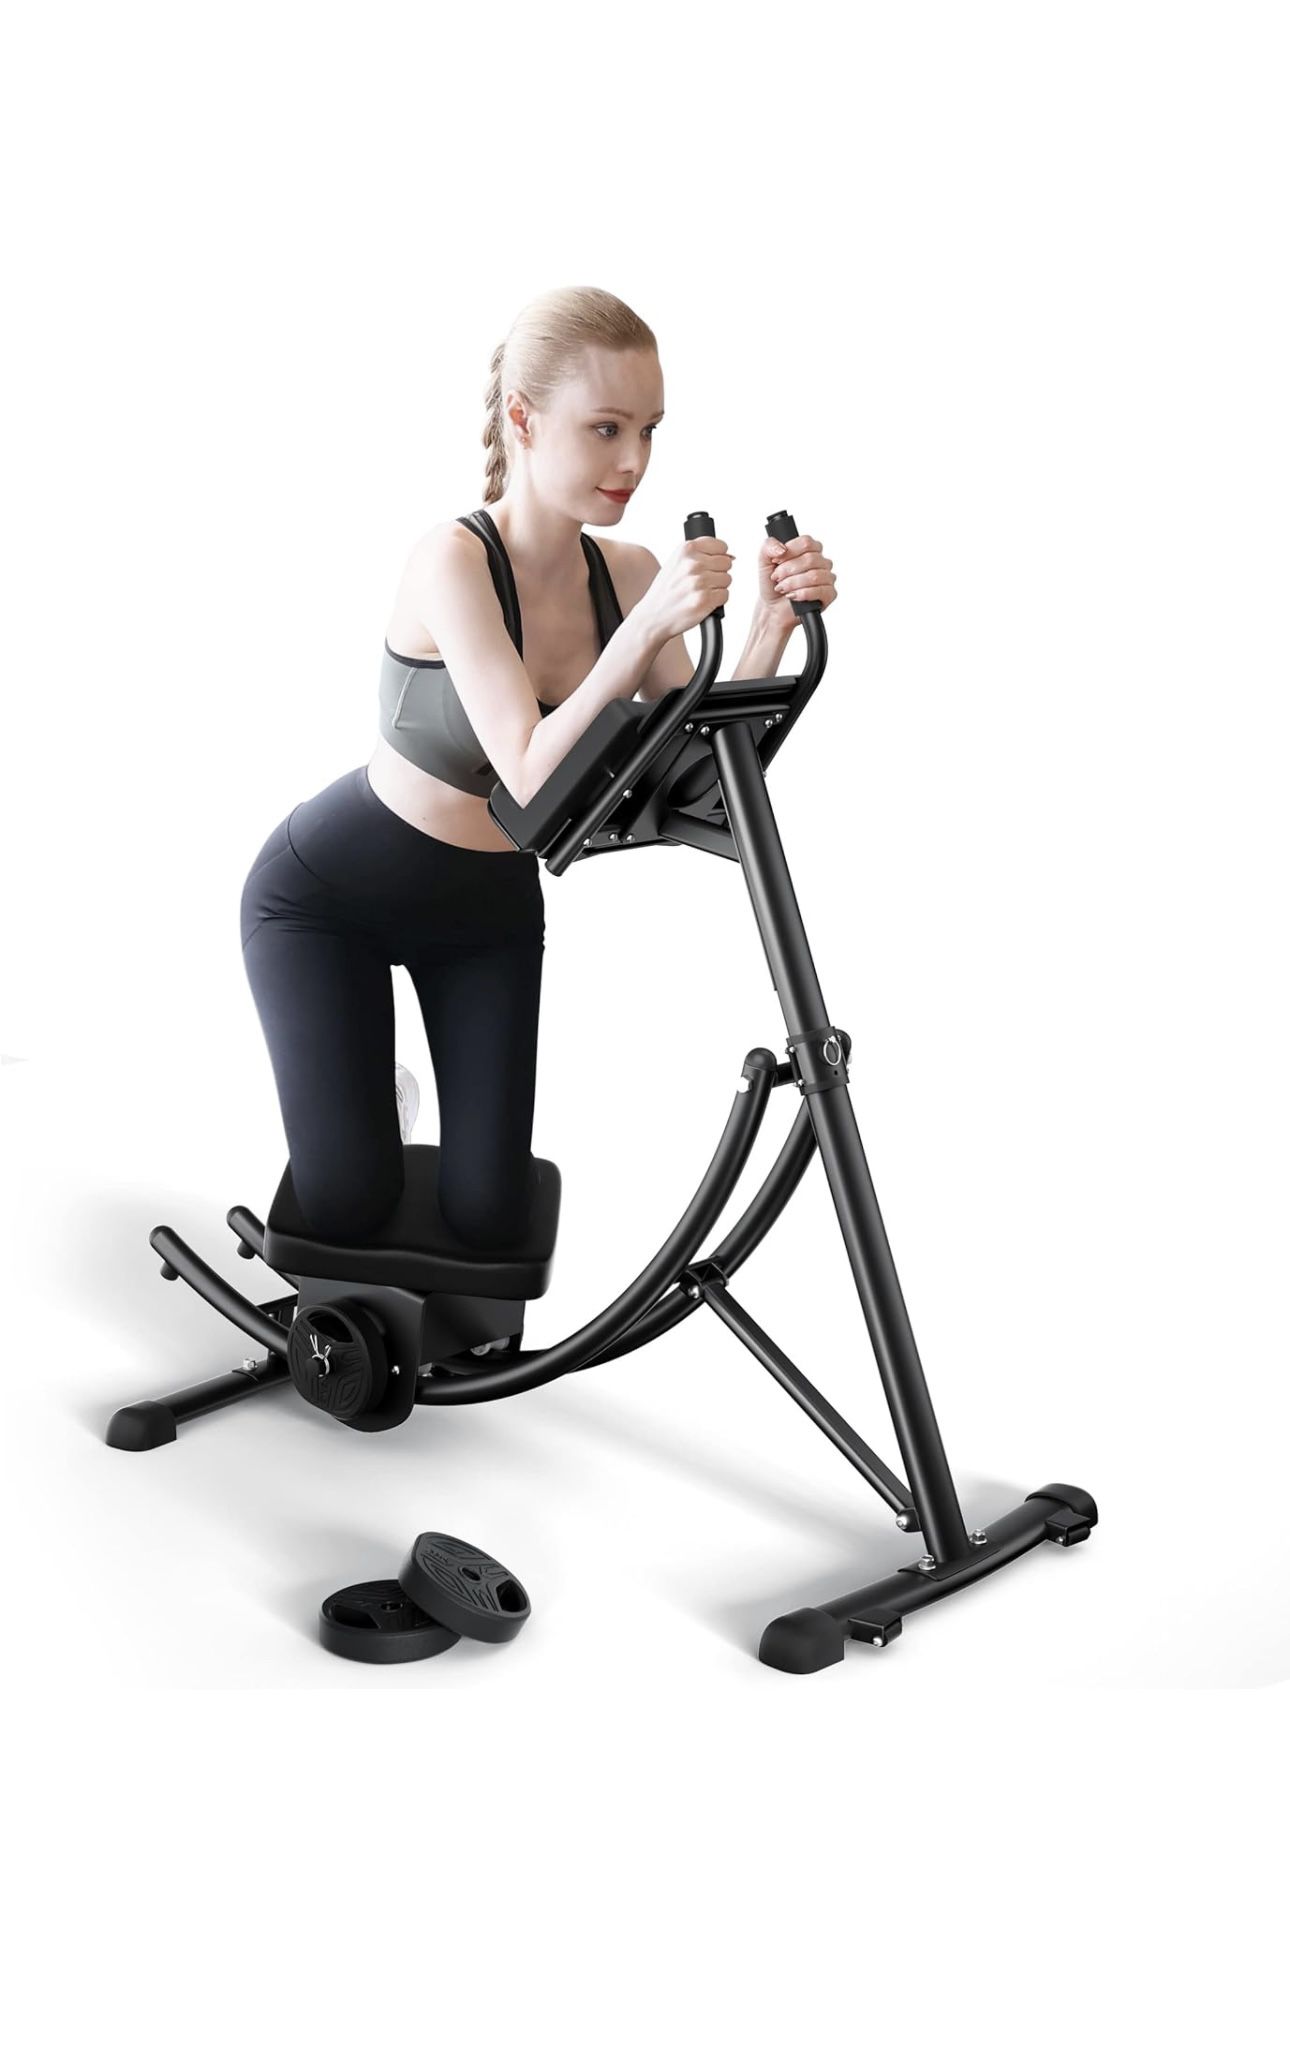 Ab Machine Foldable Abdominal Crunch Coaster Exercise Equipment Max Capacity , Less Stress on Neck & Back, Abdominal/Core Fitness Equipment for Home G